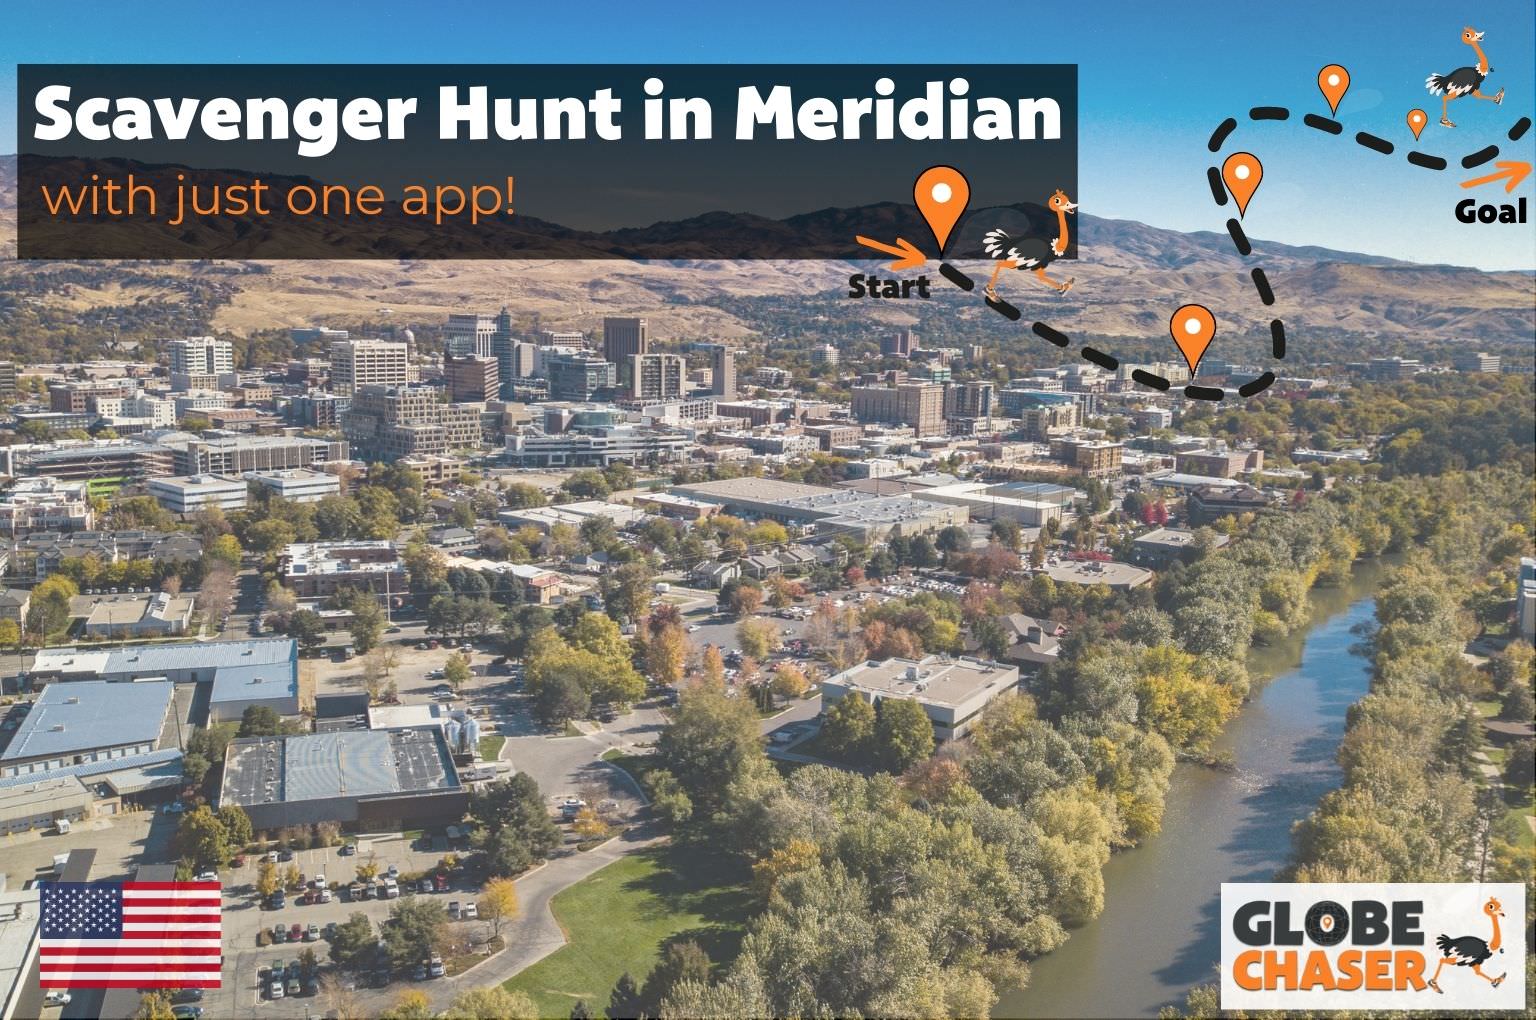 Scavenger Hunt in Meridian, USA - Family Activities with the Globe Chaser App for Outdoor Fun